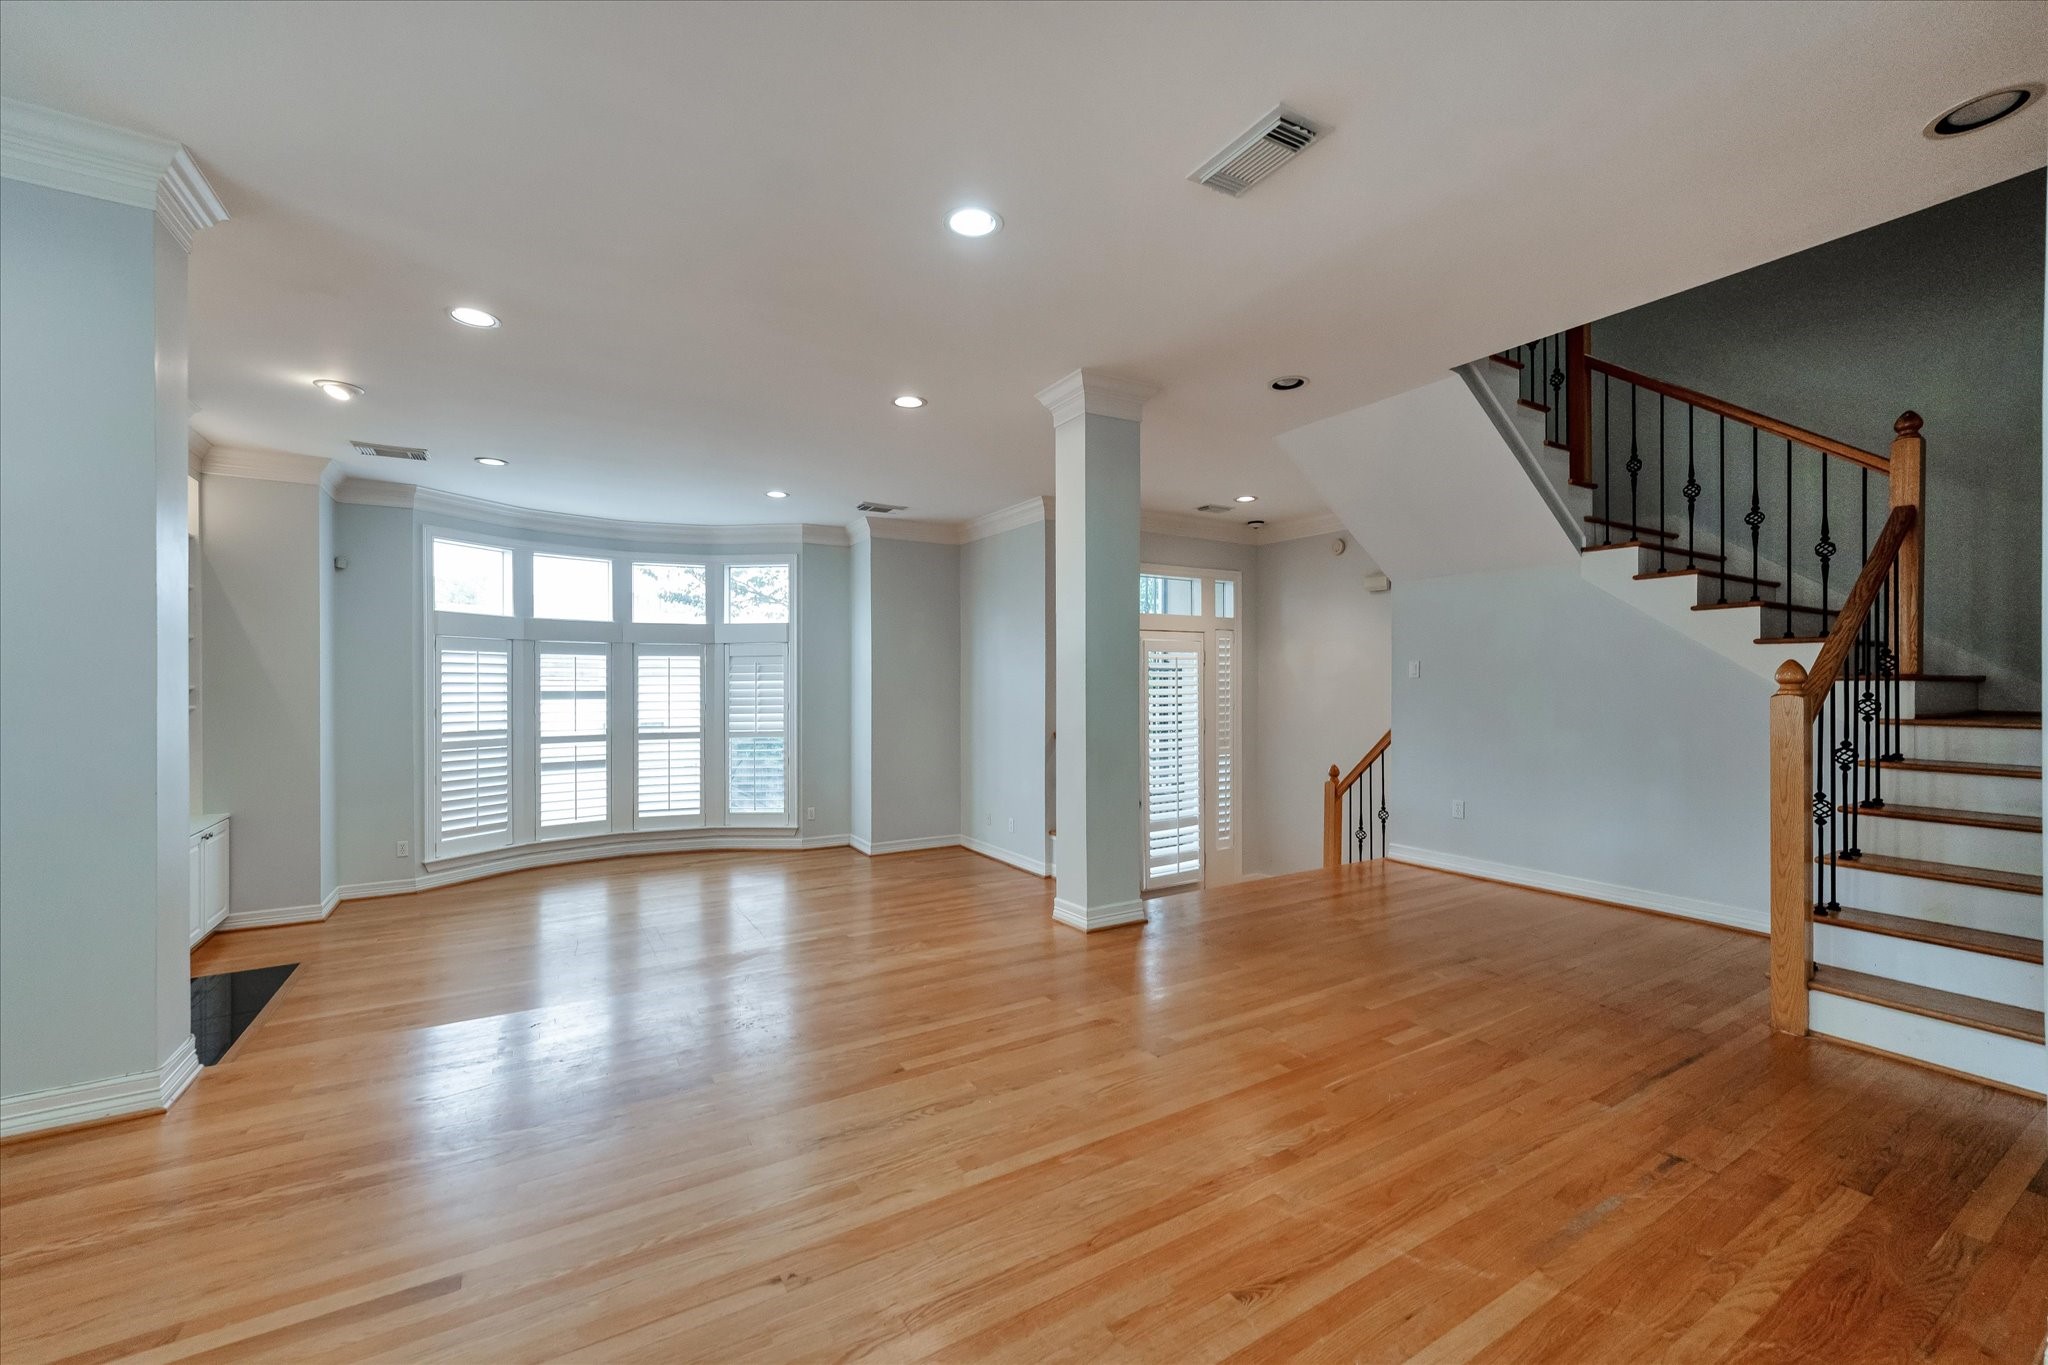 Take a look at this opposite angle of your dining room without virtual staging. This frame showcases about 80% of the flow for the 2nd floor. Going through from your entrance to your living area and dining room, then showcasing the beautiful stairwell that leads you to the third floor.